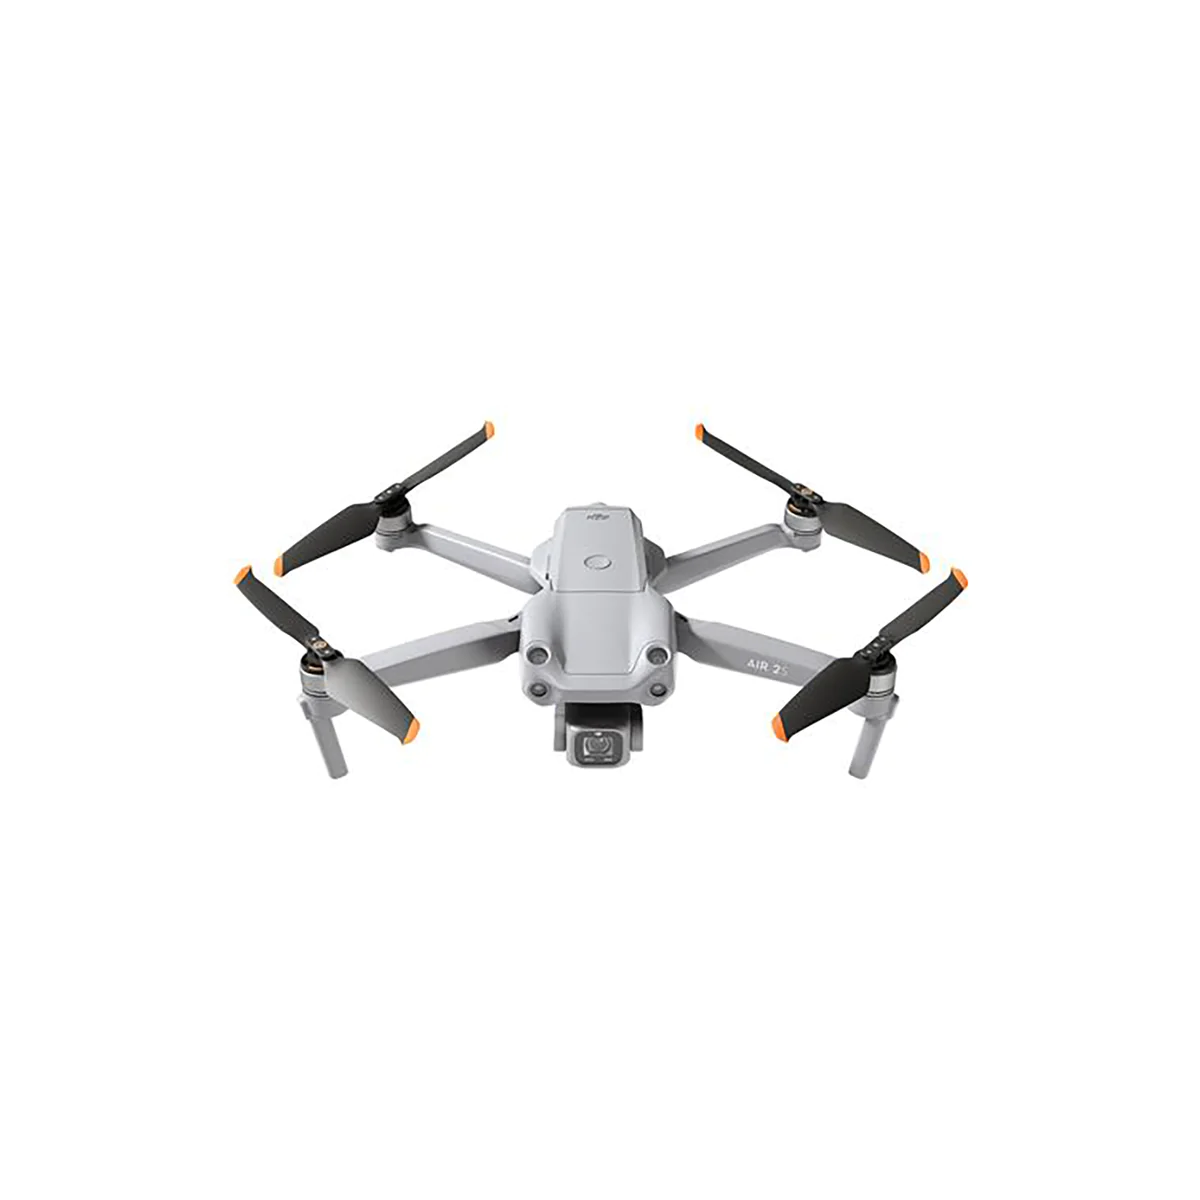 What are the Benefits of Drone Aerial Photography